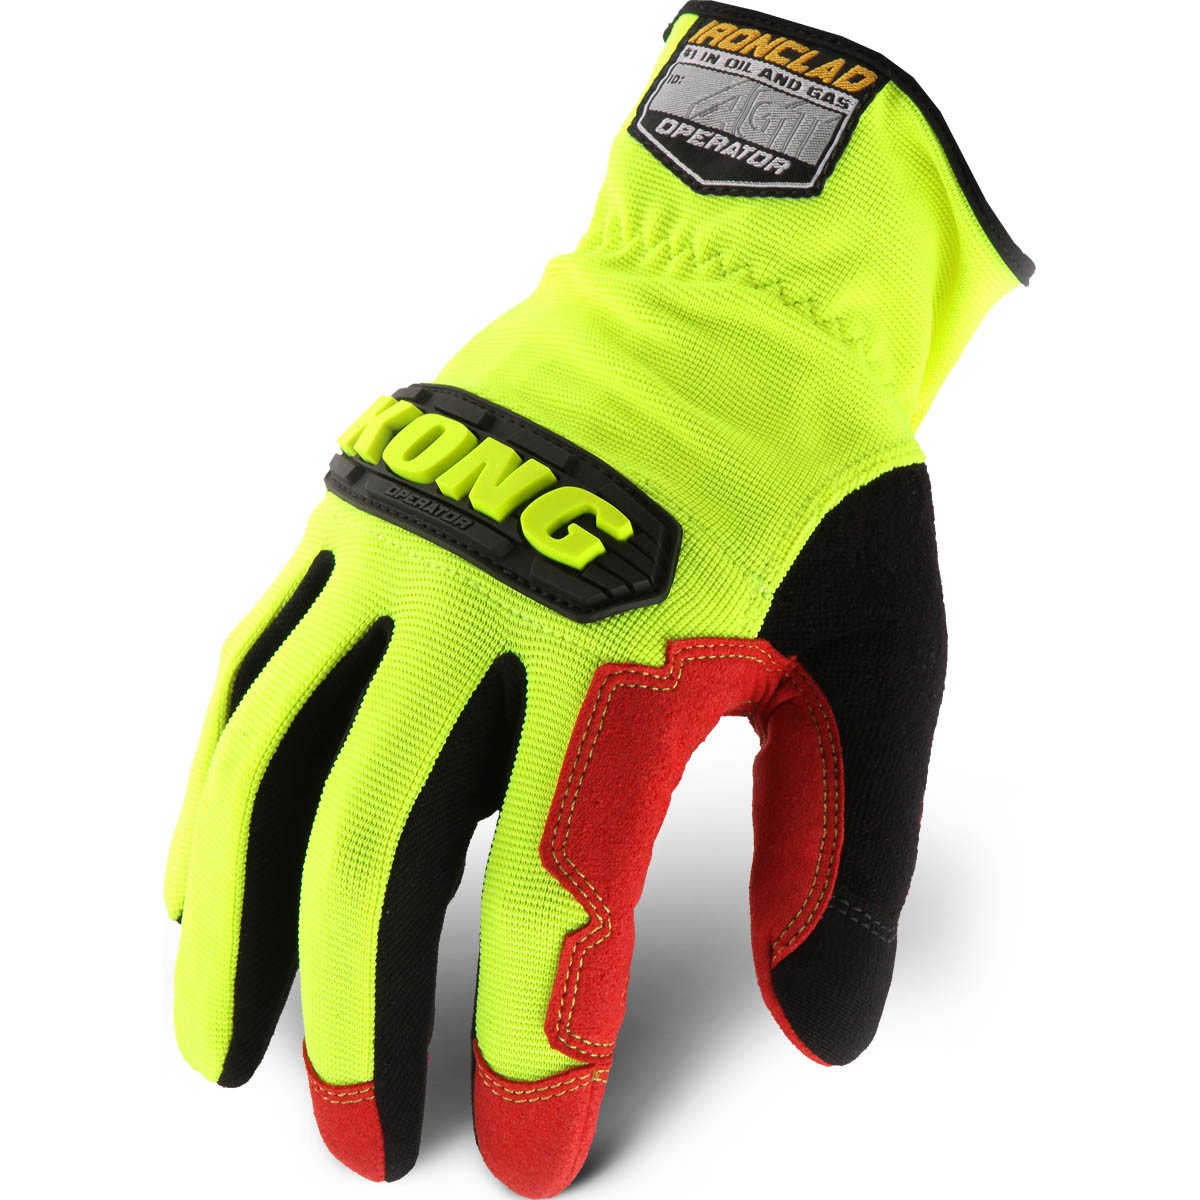 Ironclad mens Work Glove KONG RIGGER GRIP A5, Red/Yellow, Large US